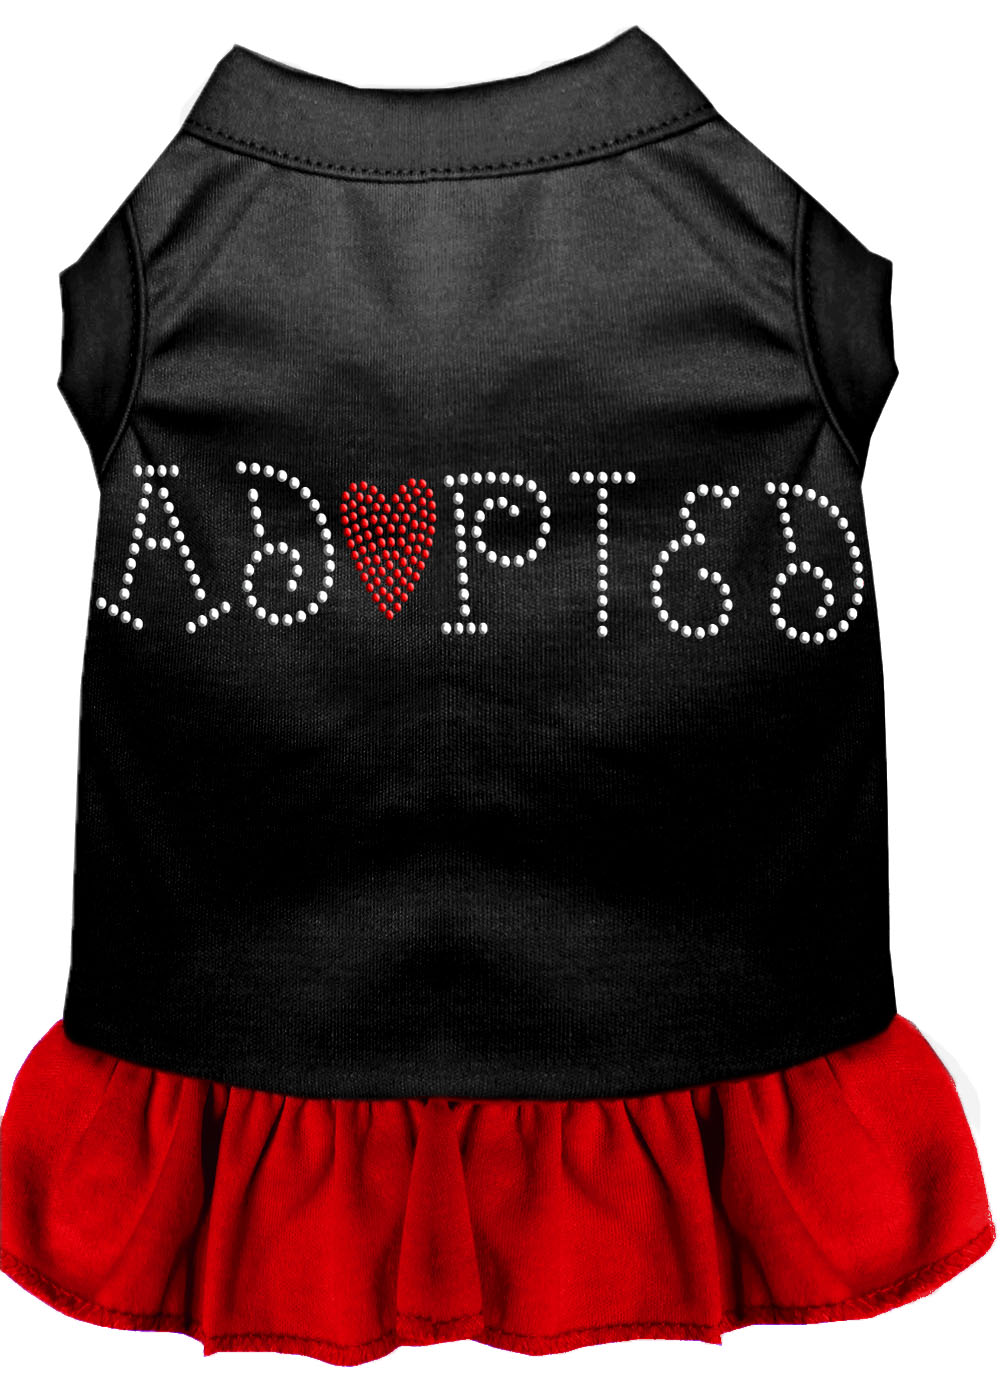 Adopted Rhinestone Dresses Black with Red Med